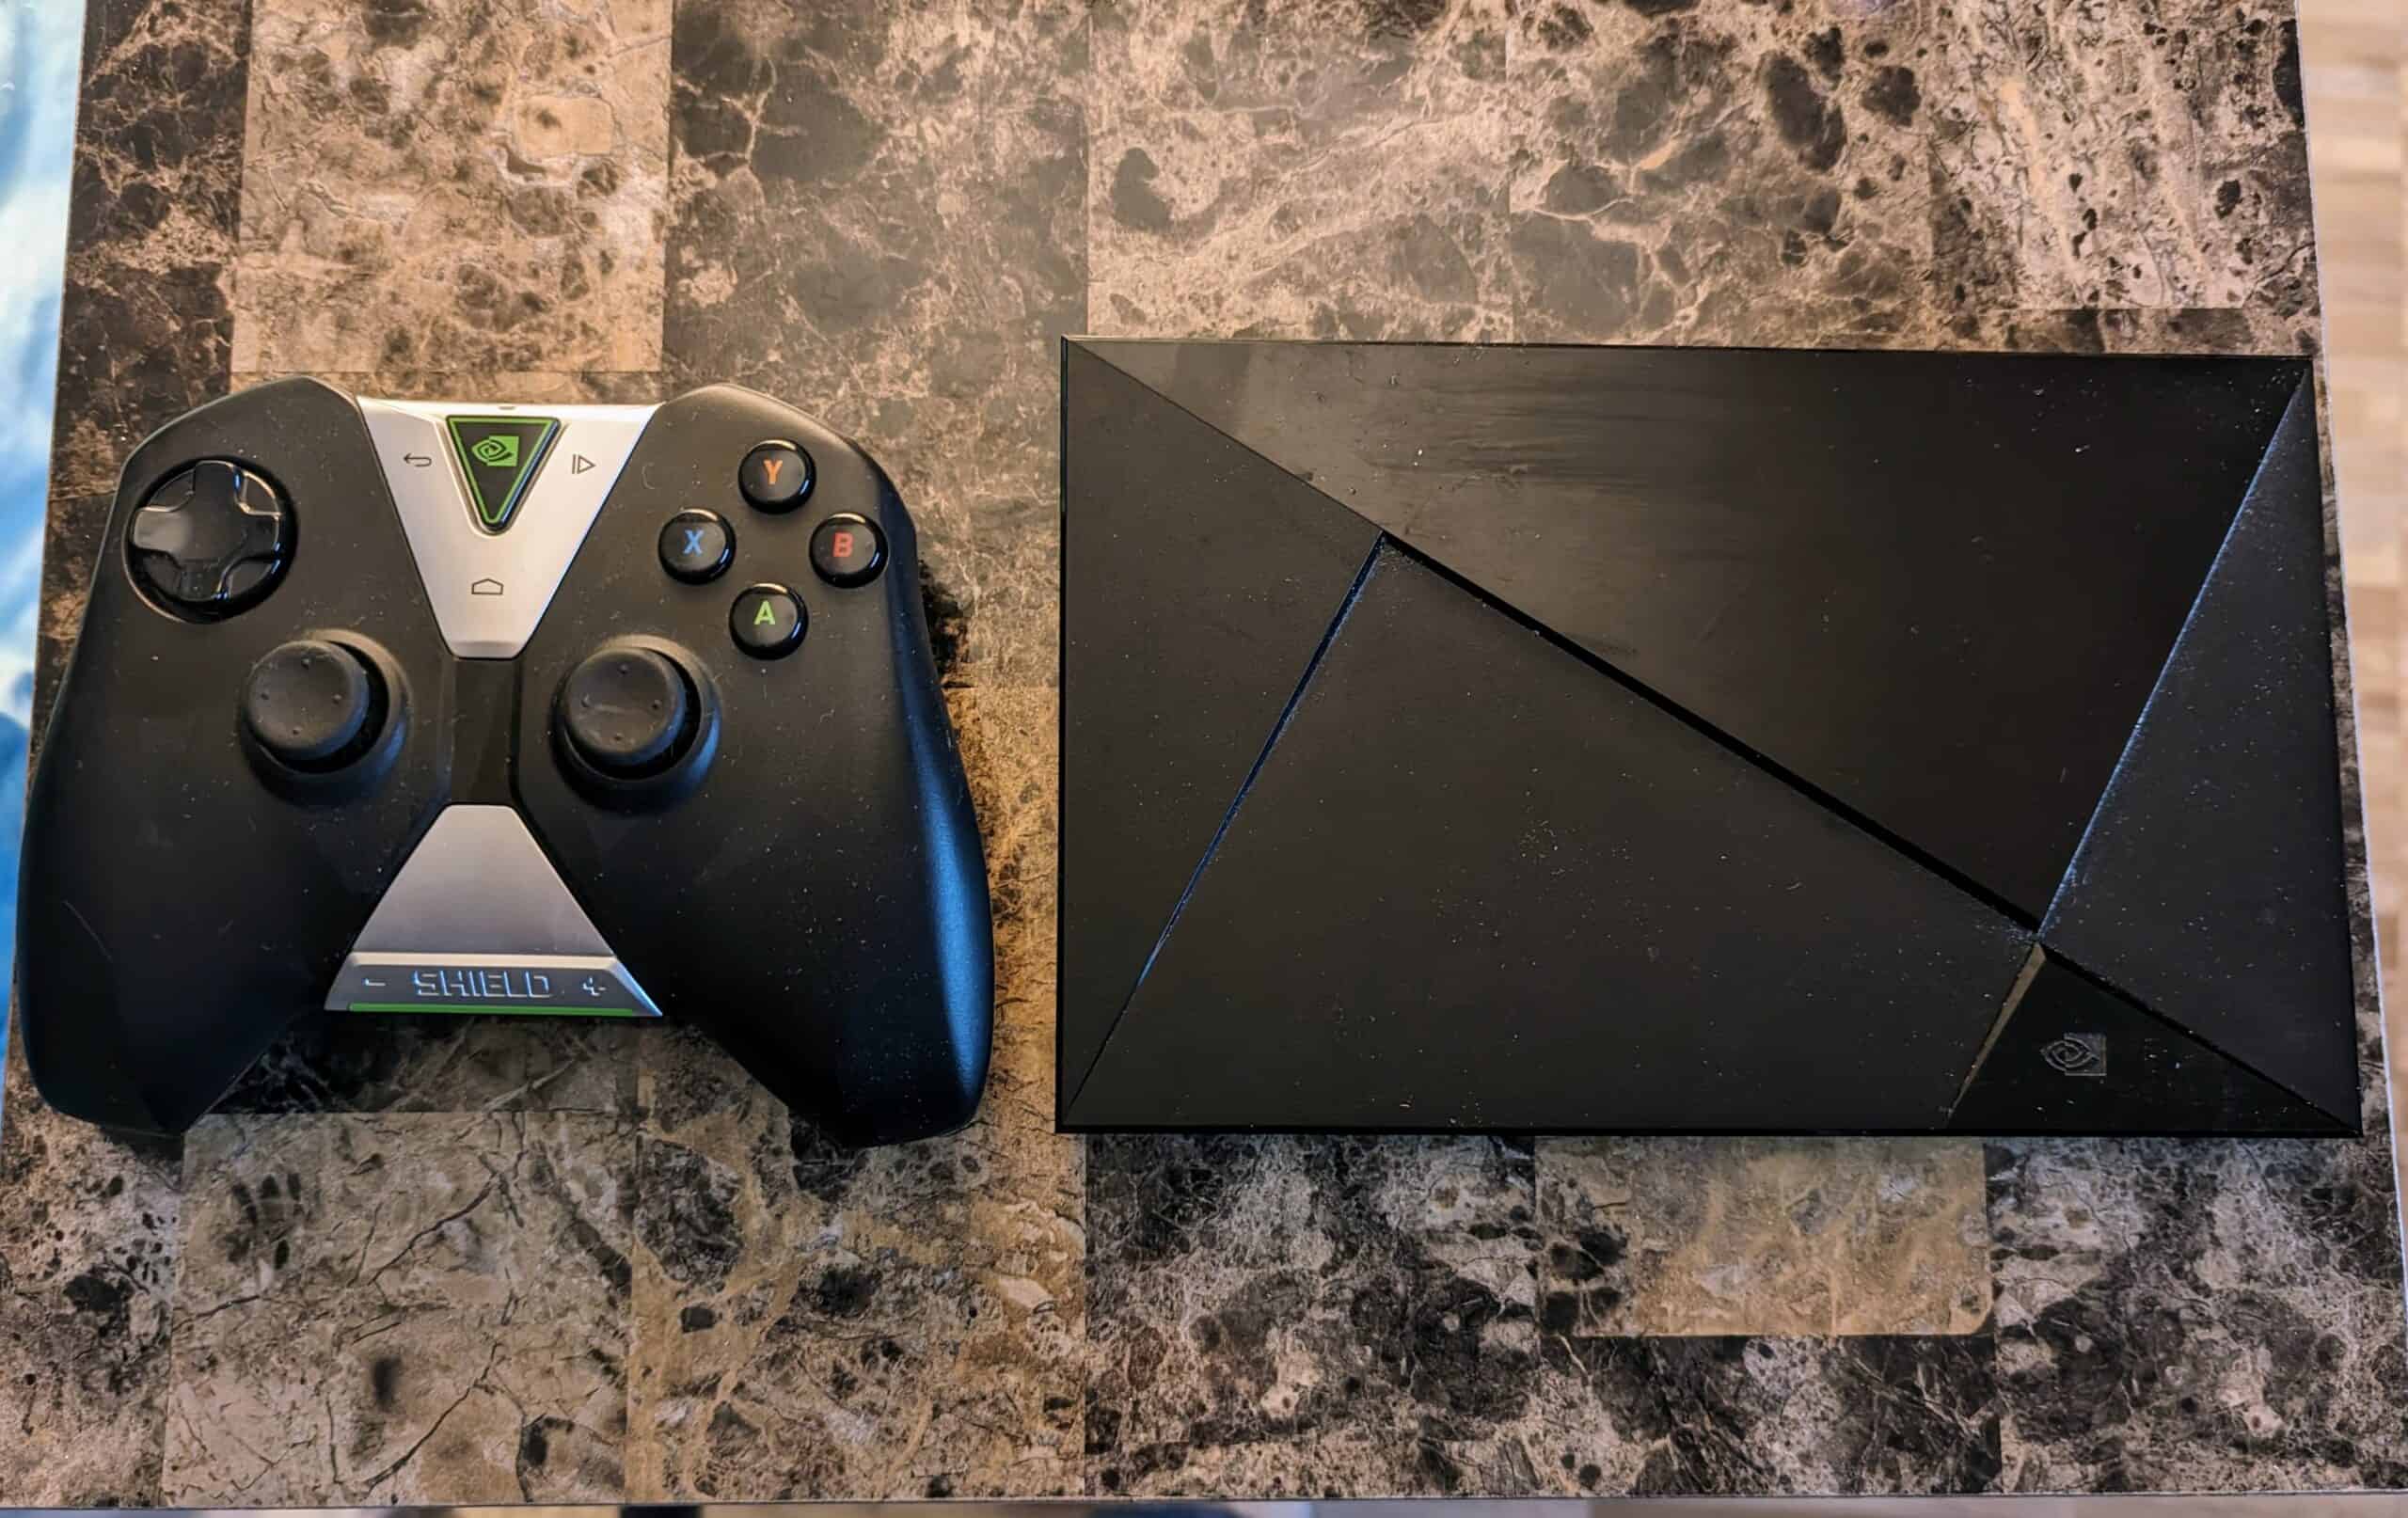 Featured Image For Reasons to Avoid a Nvidia Shield Article. An Nvidia Shield sitting next to its controller on a table.